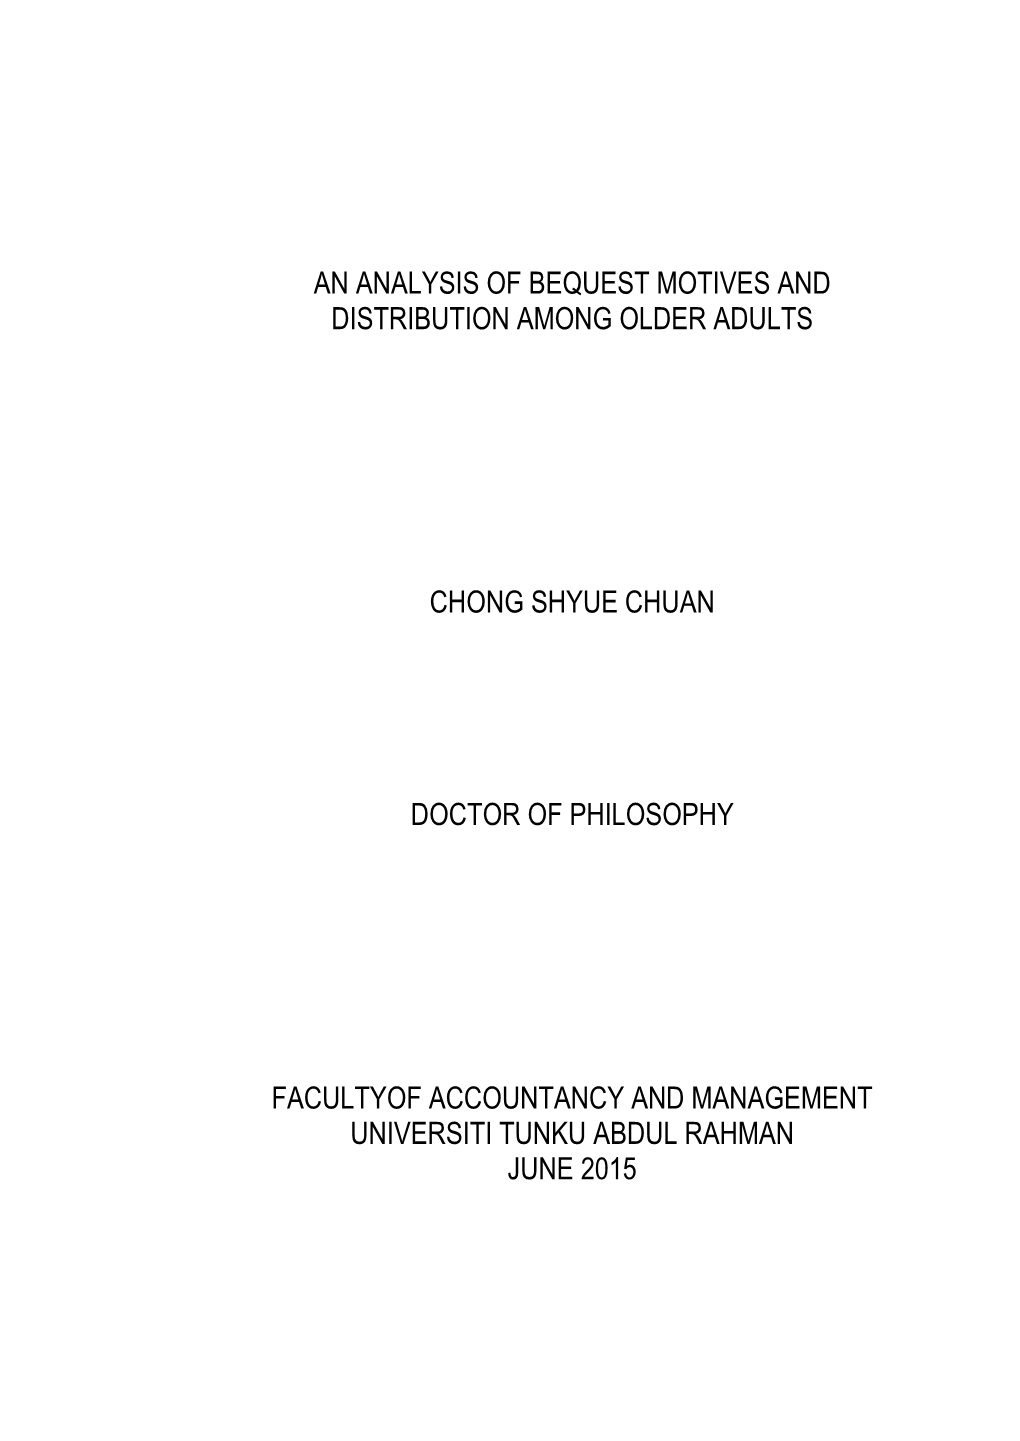 An Analysis of Bequest Motives and Distribution Among Older Adults Chong Shyue Chuan Doctor of Philosophy Facultyof Accountan